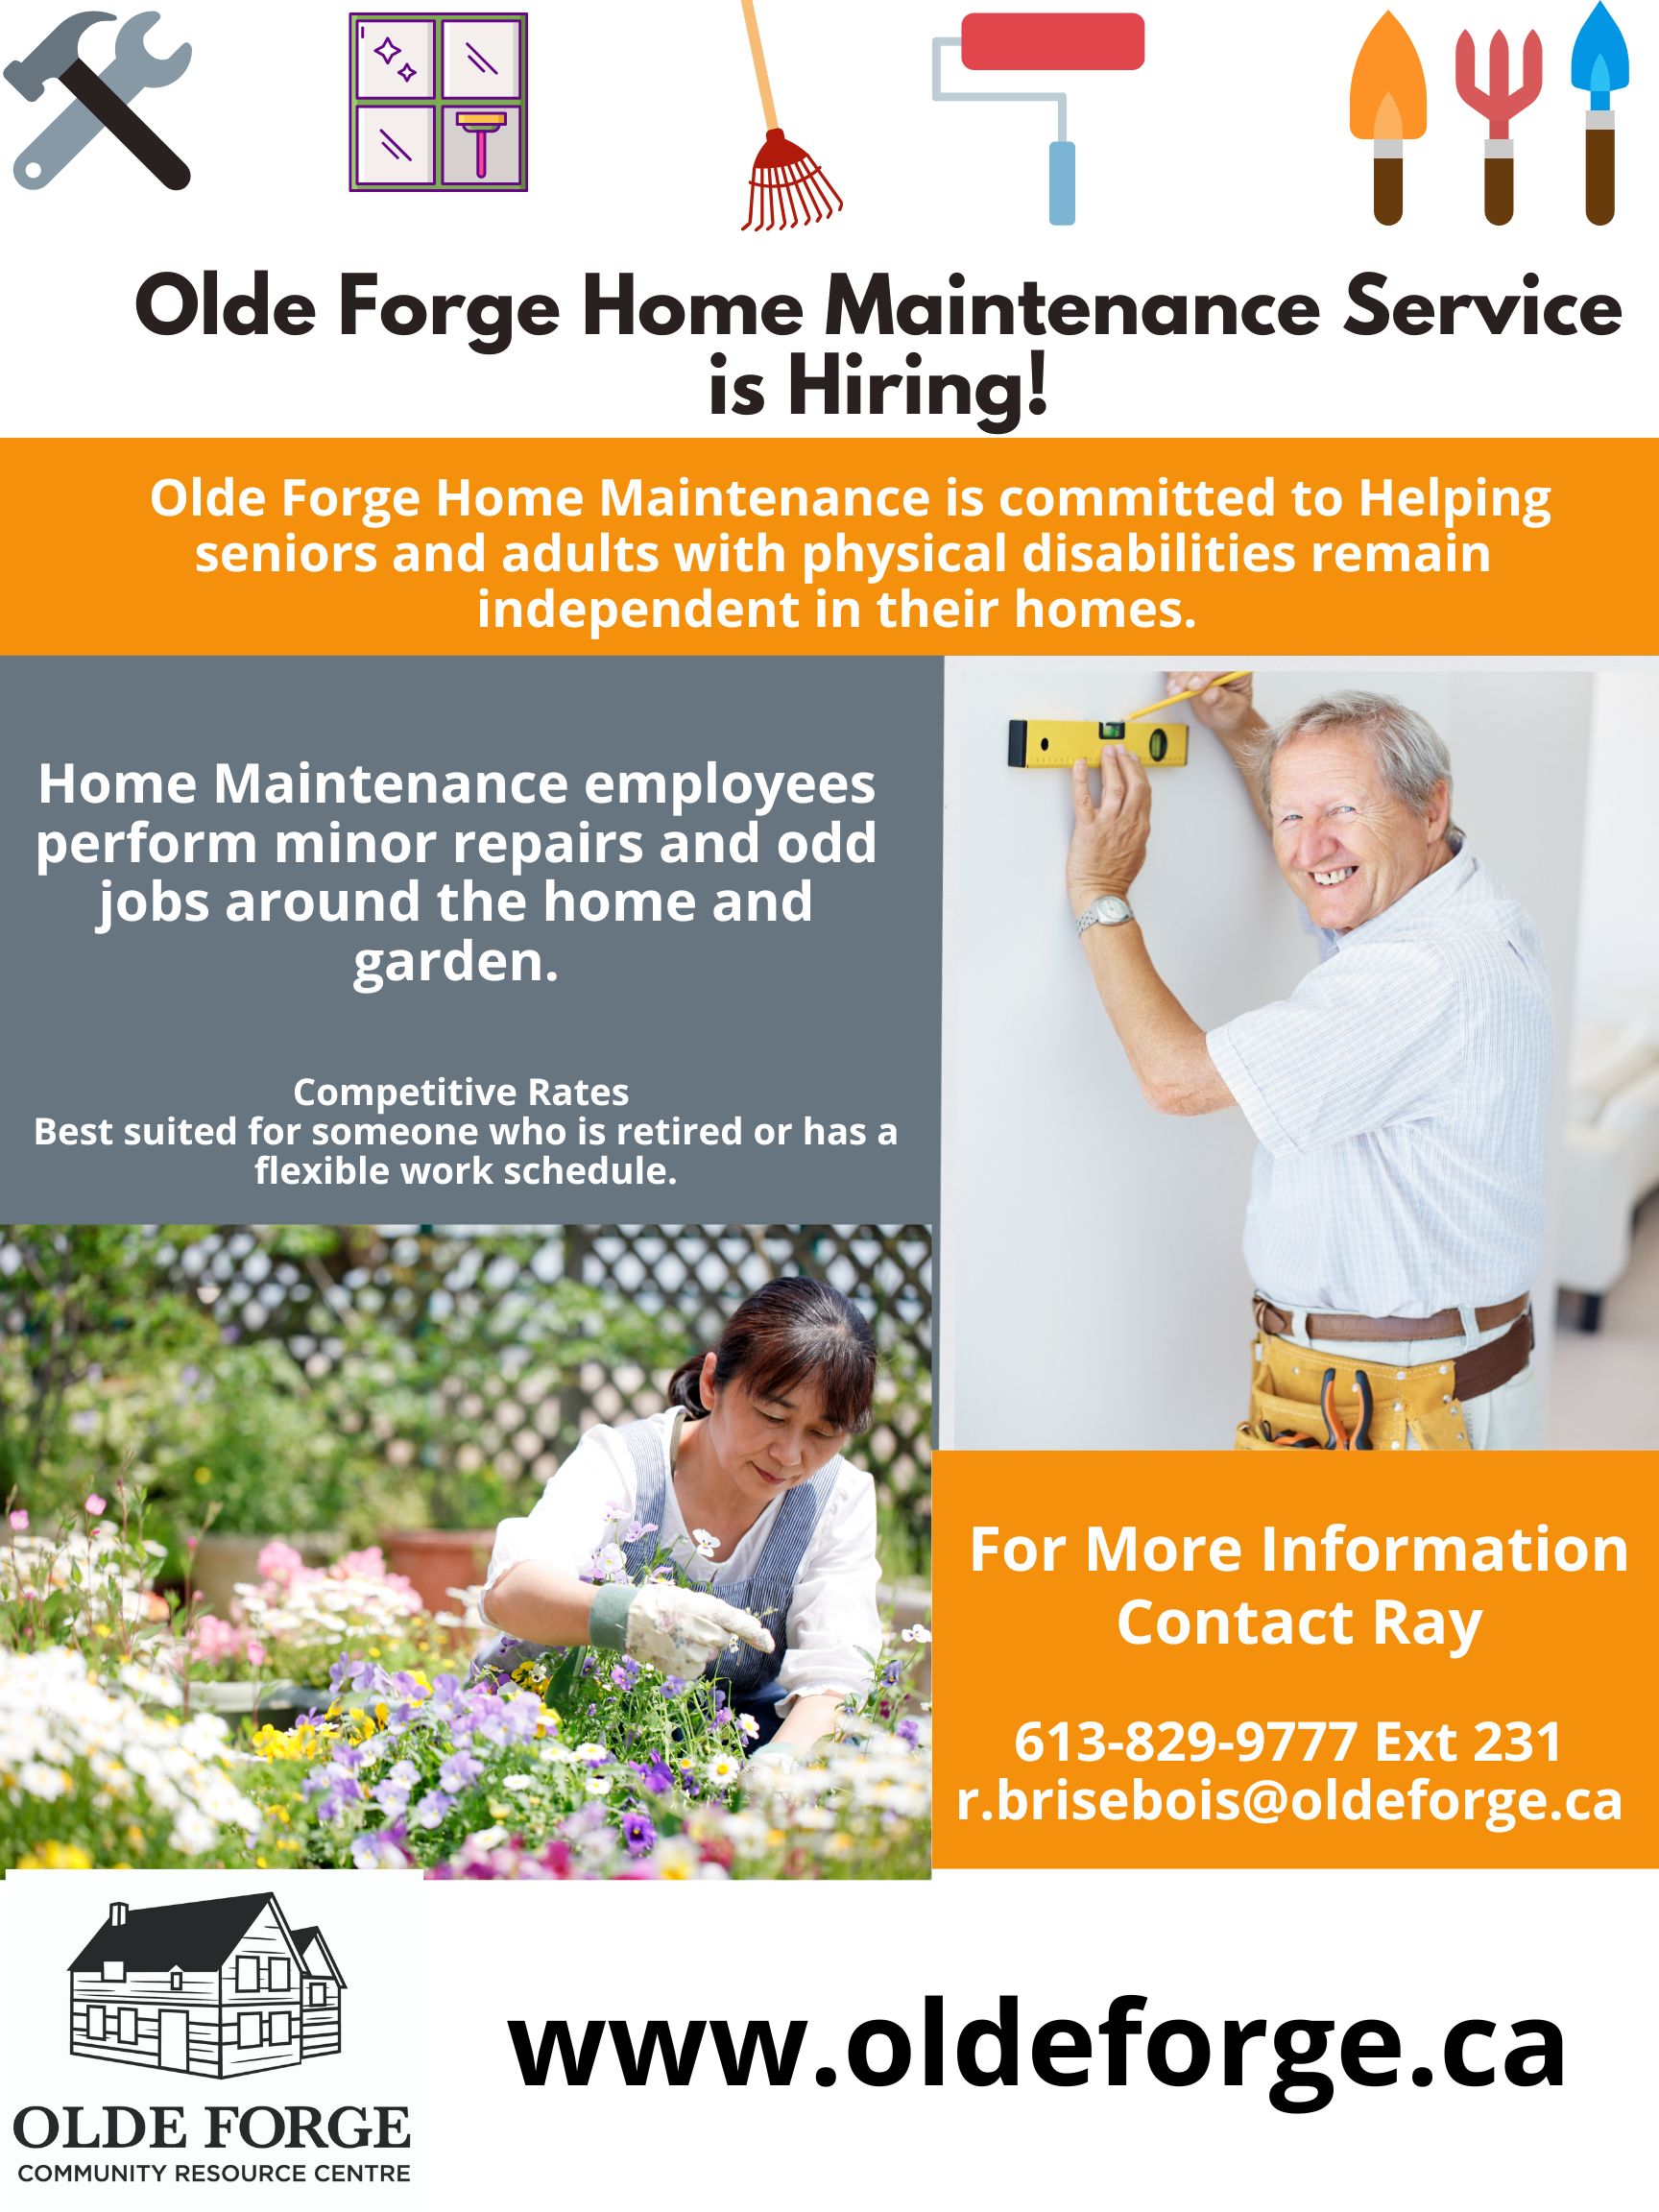 Olde Forge Home Maintenance Service is Hiring 2